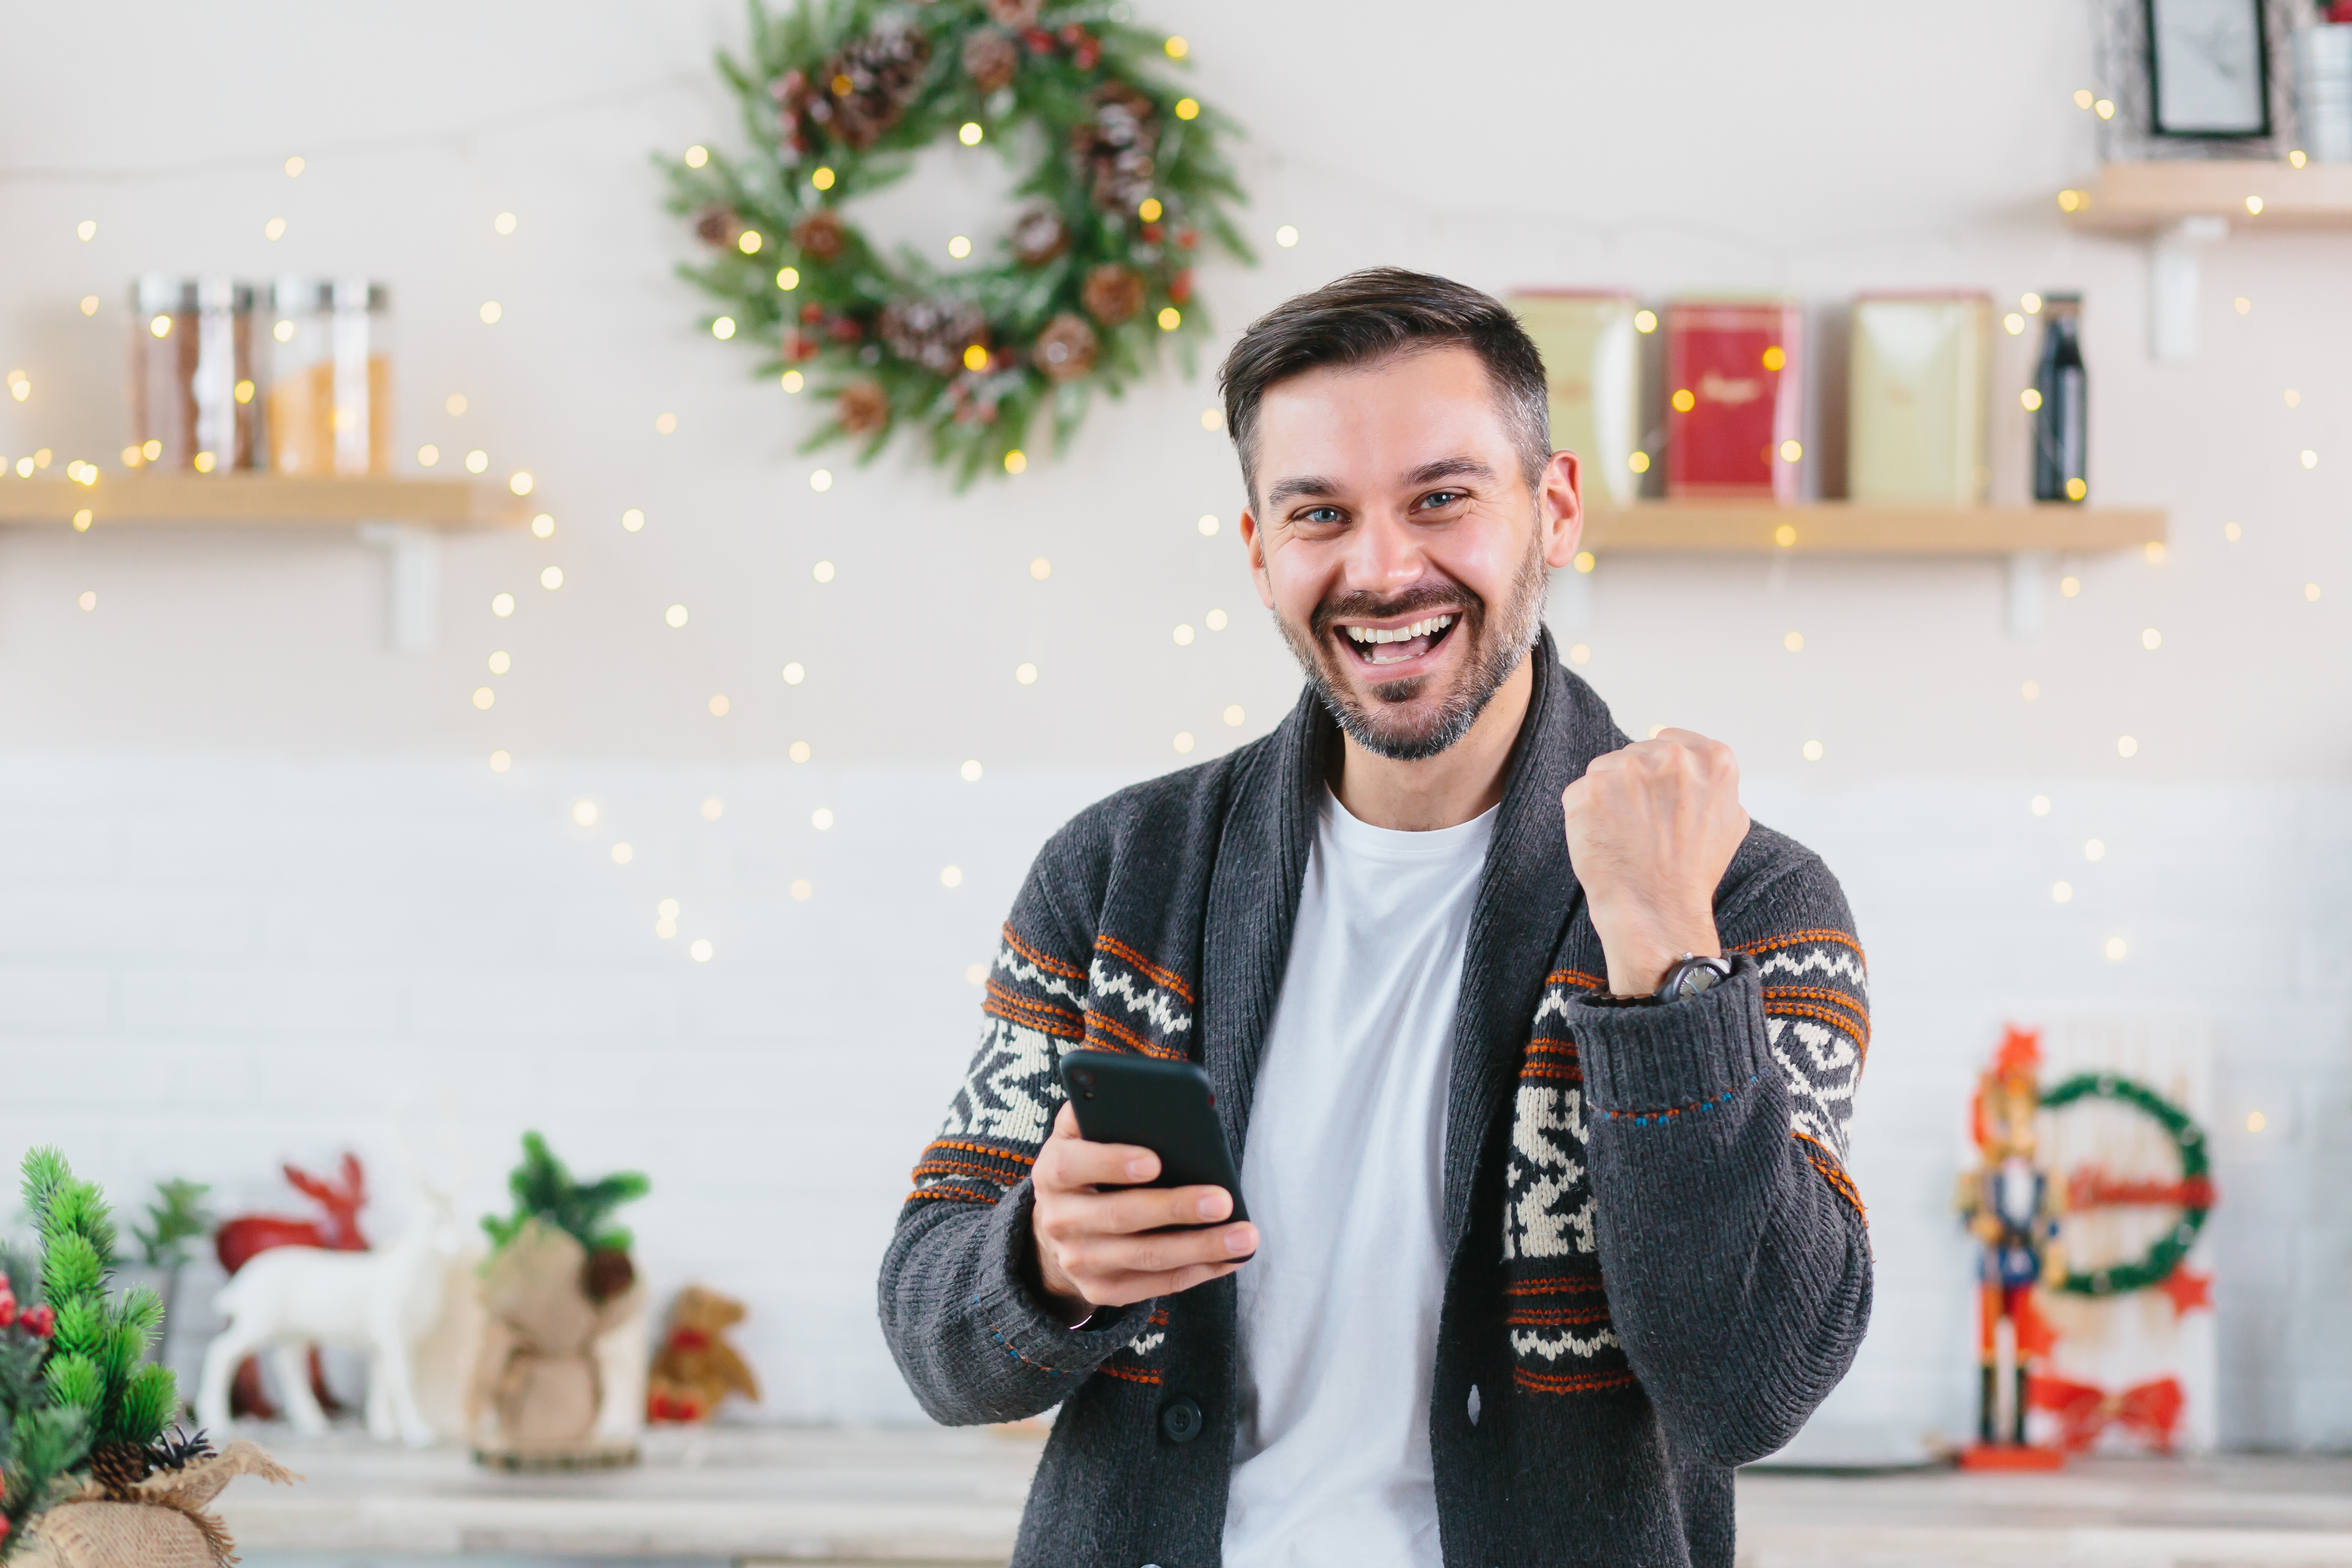 Young man celebrating a victory at home during Christmas | Source: Shutterstock